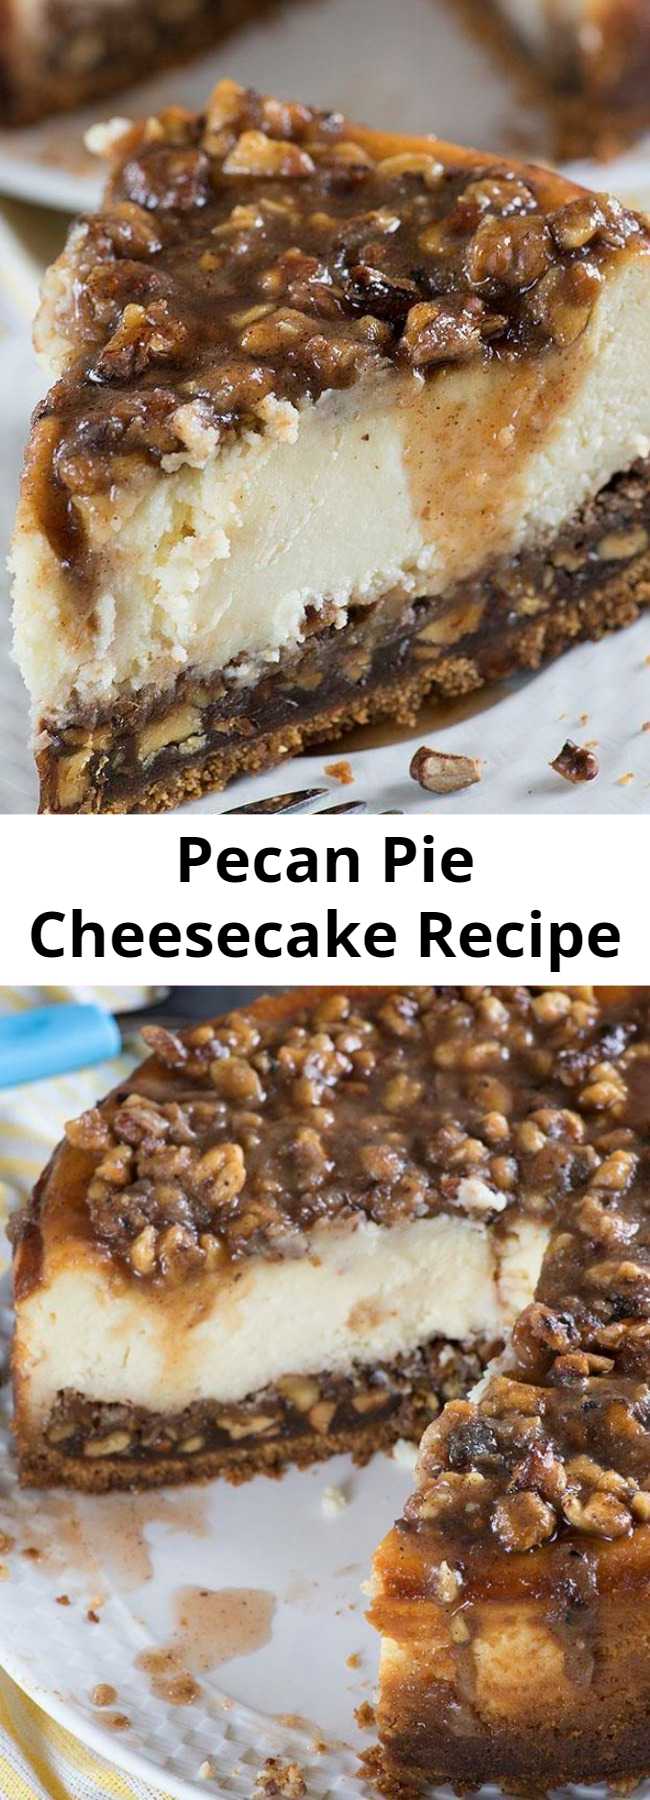 Easy Pecan Pie Cheesecake Recipe - This dreamy Pecan Pie Cheesecake is the perfect Thanksgiving treat. A combination of classic pecan pie and creamy cheesecake makes a tasty twist of two traditional treats!